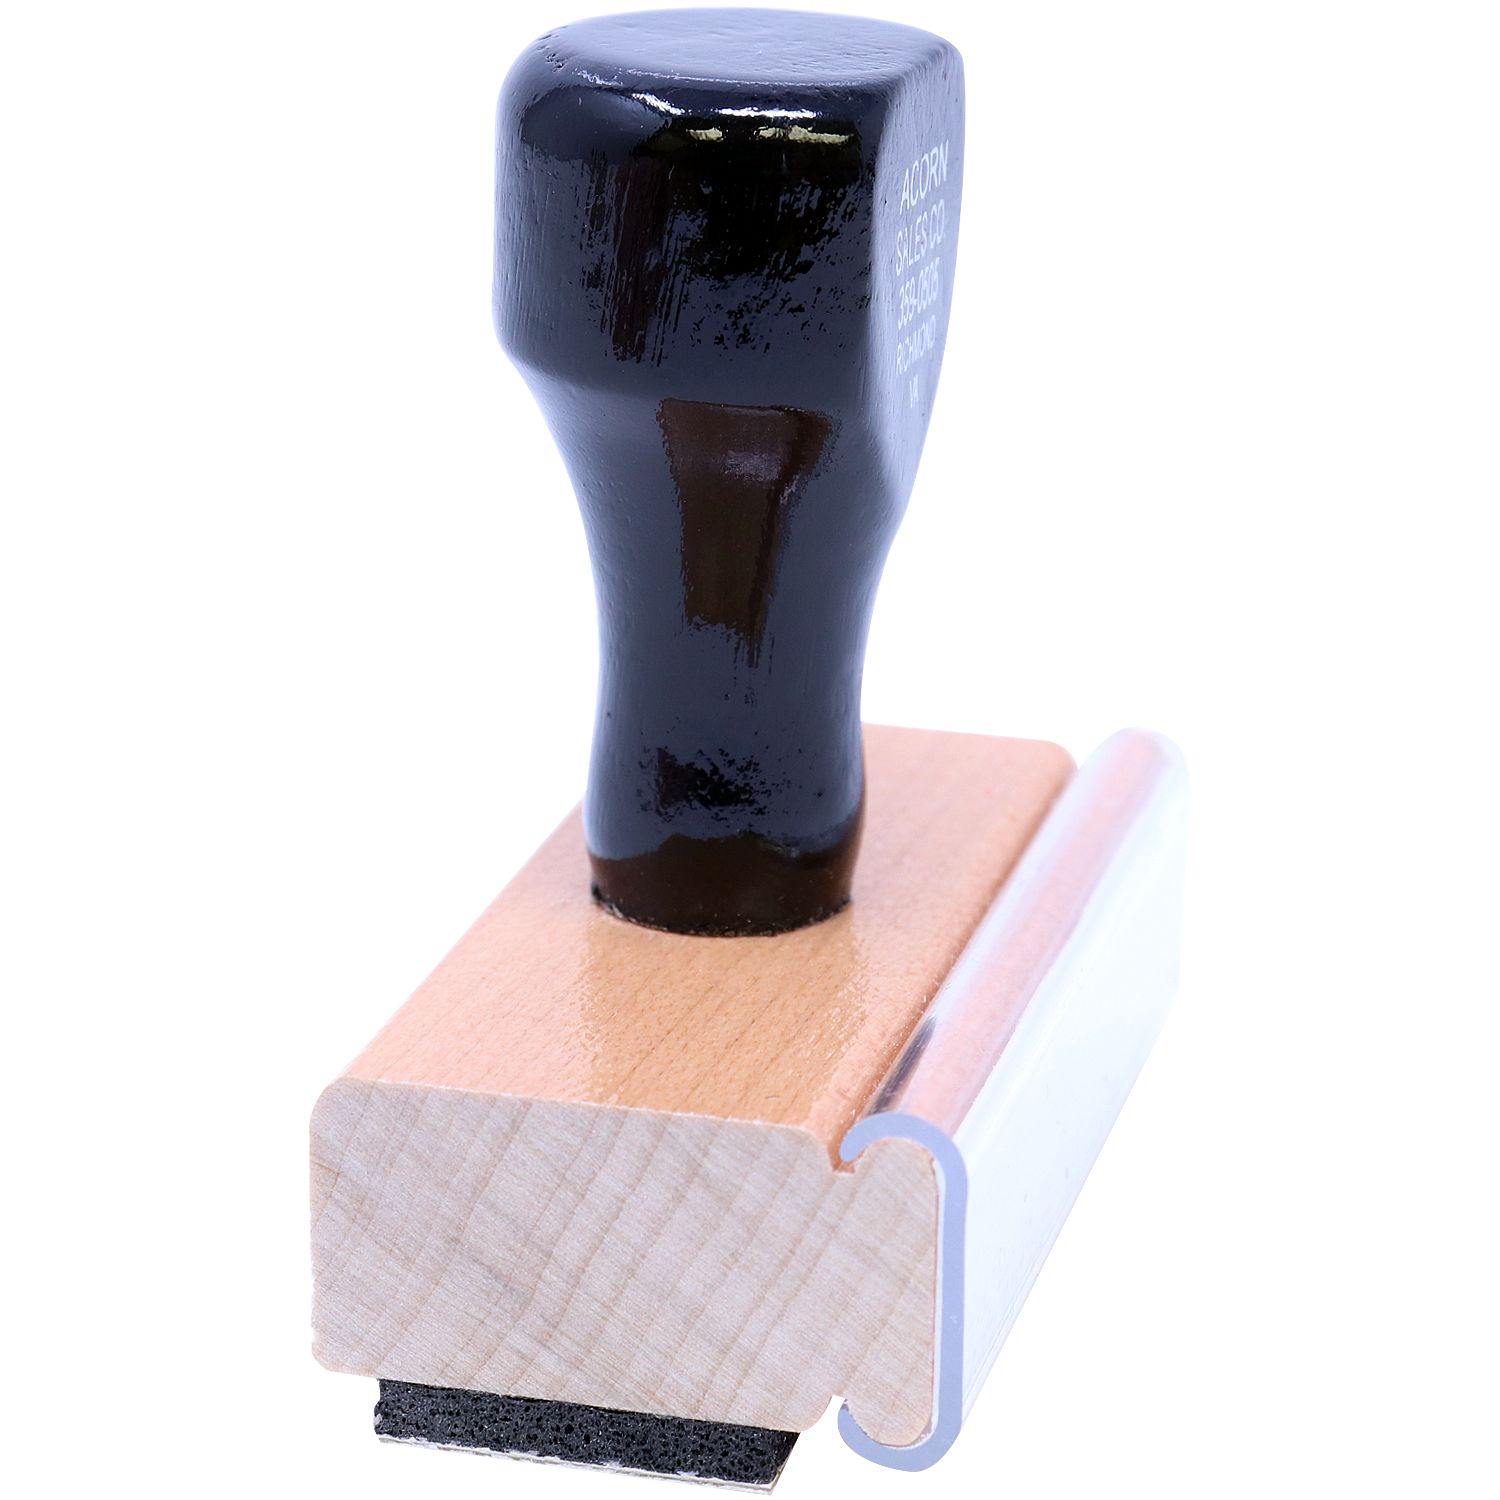 Side View of Large Narrow Font Final Notice Rubber Stamp at an Angle